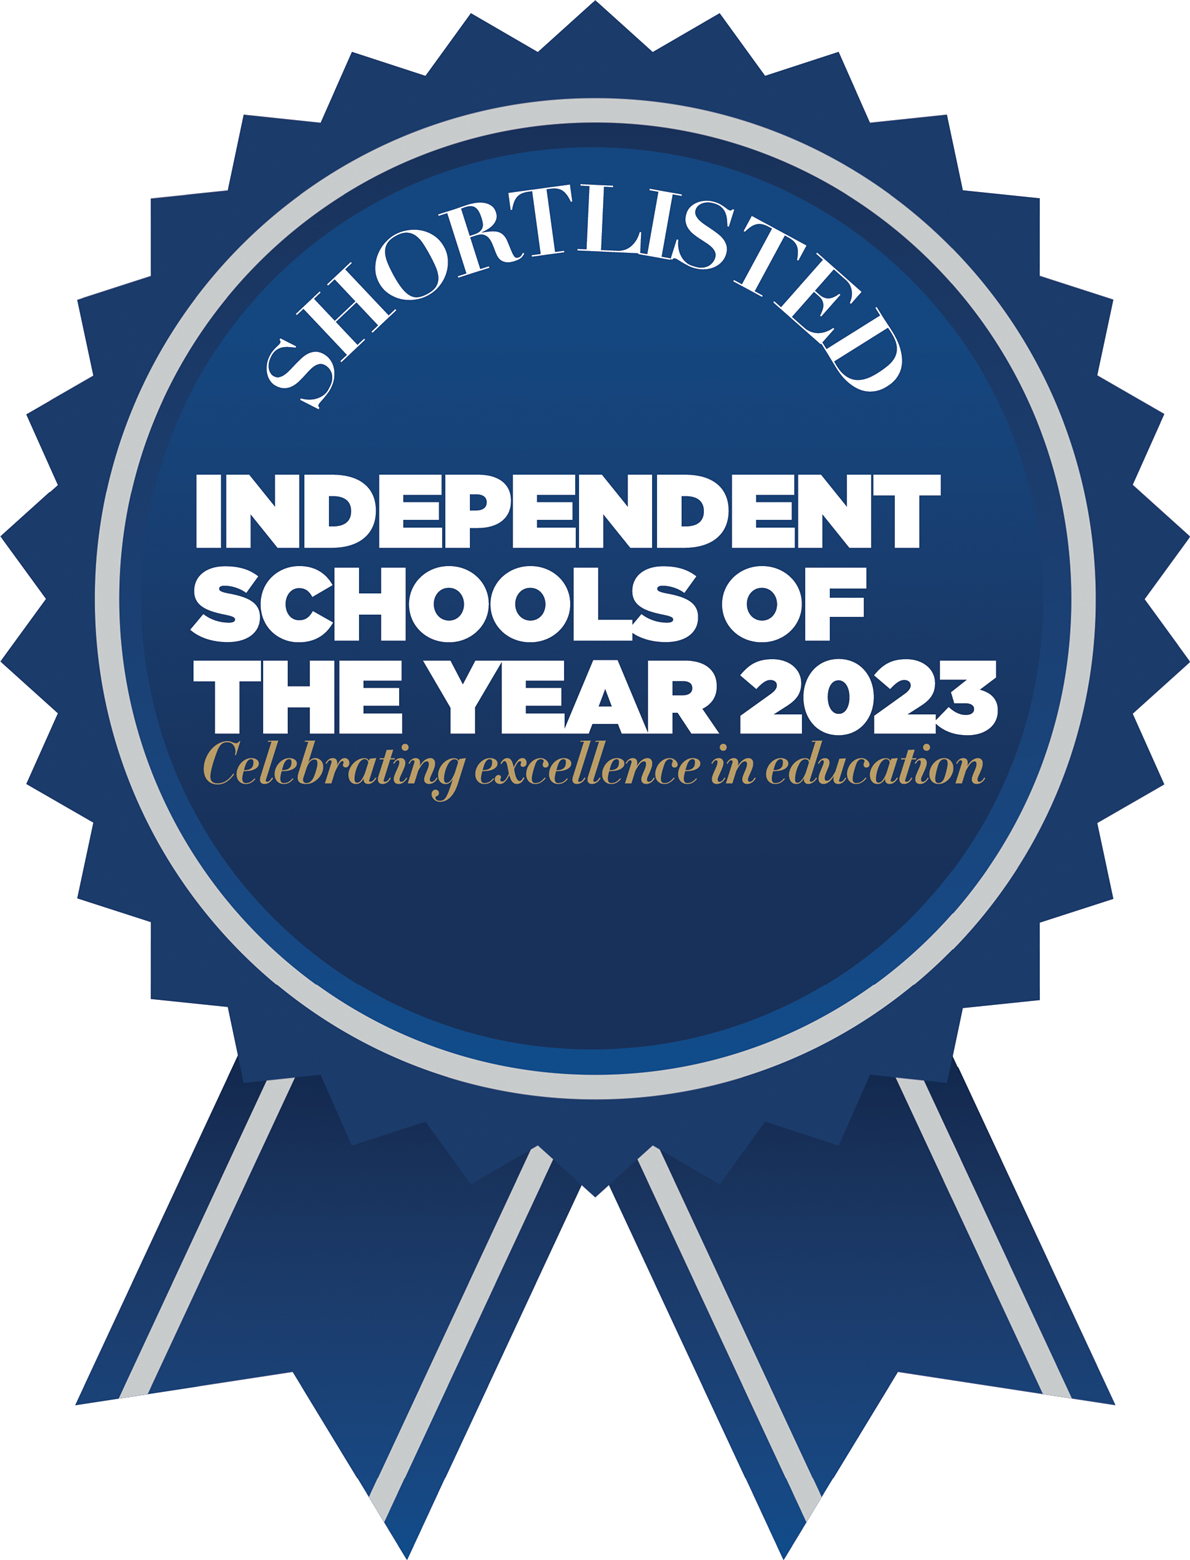 Prep School Shortlisted for Independent School of the Year: 'Outstanding New Initiative'